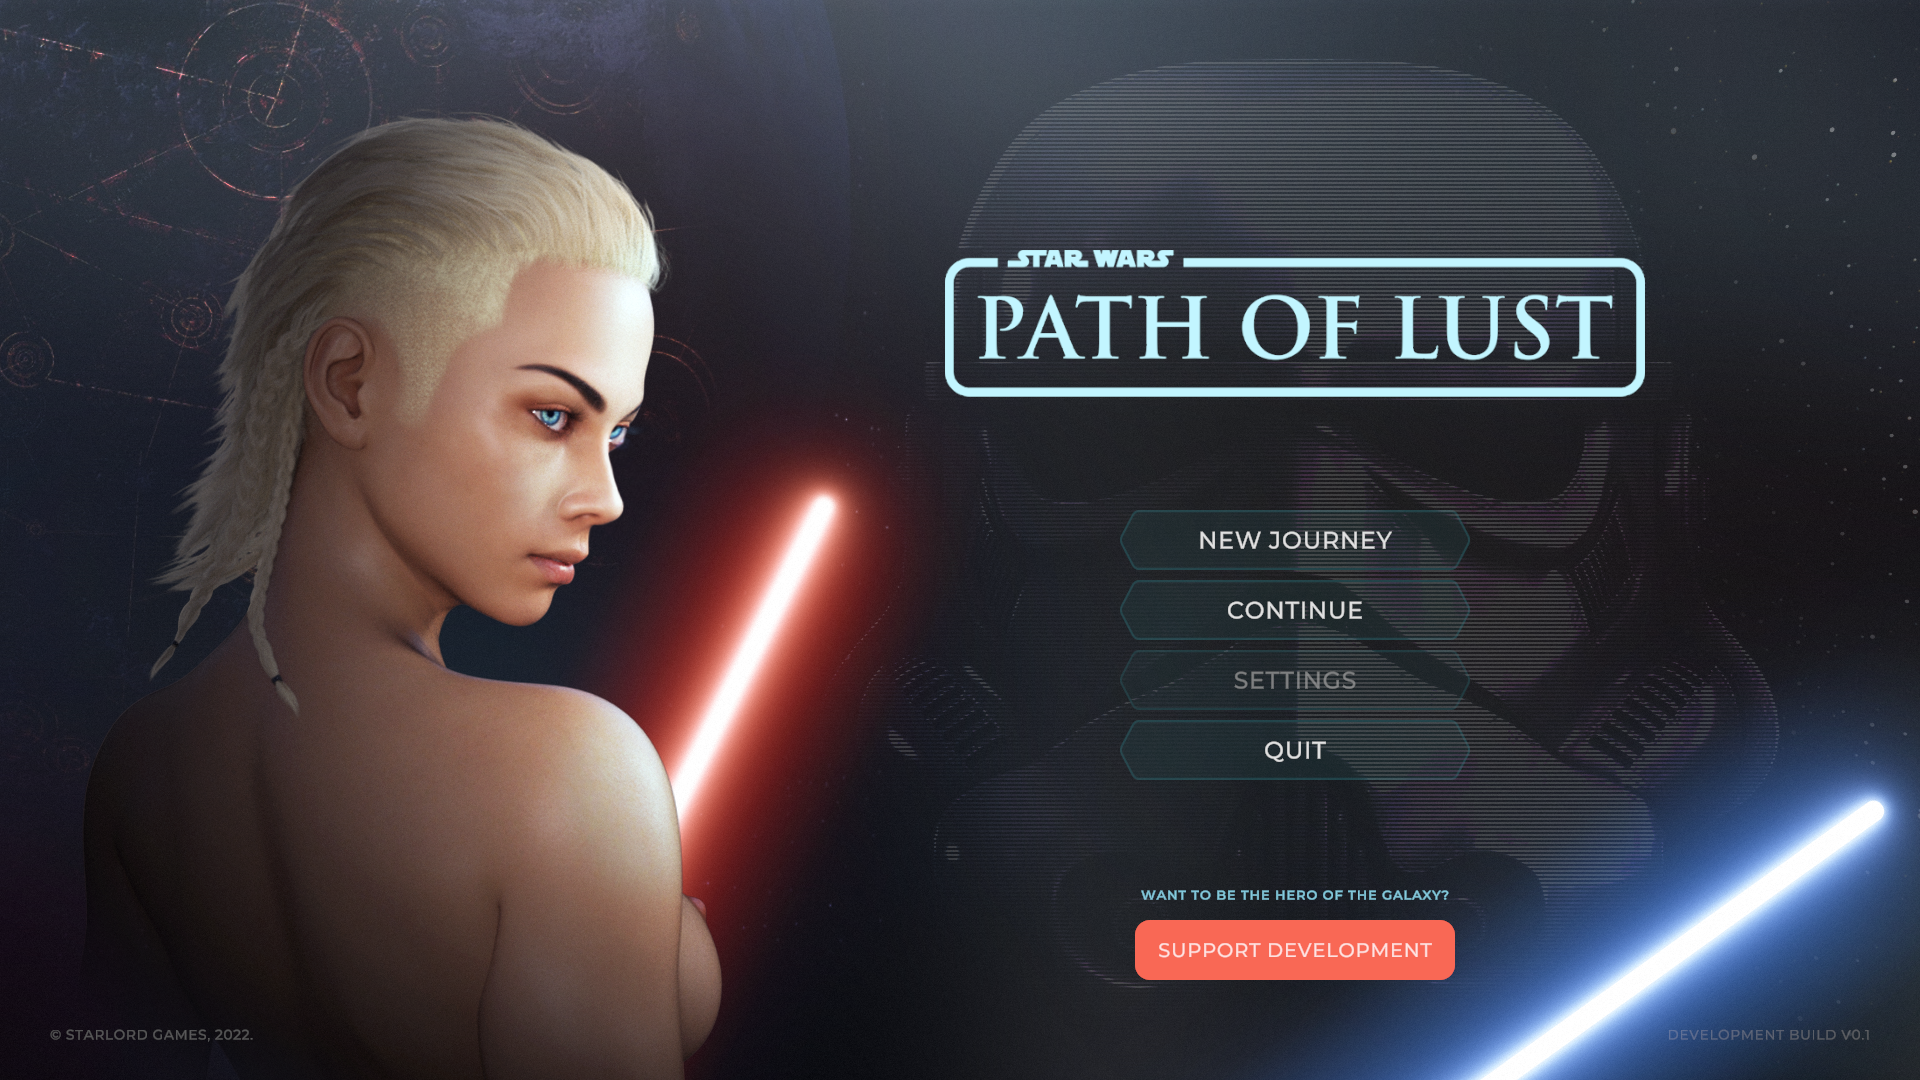 Star Wars: Path of lust v0.1.5 by StarLord Games